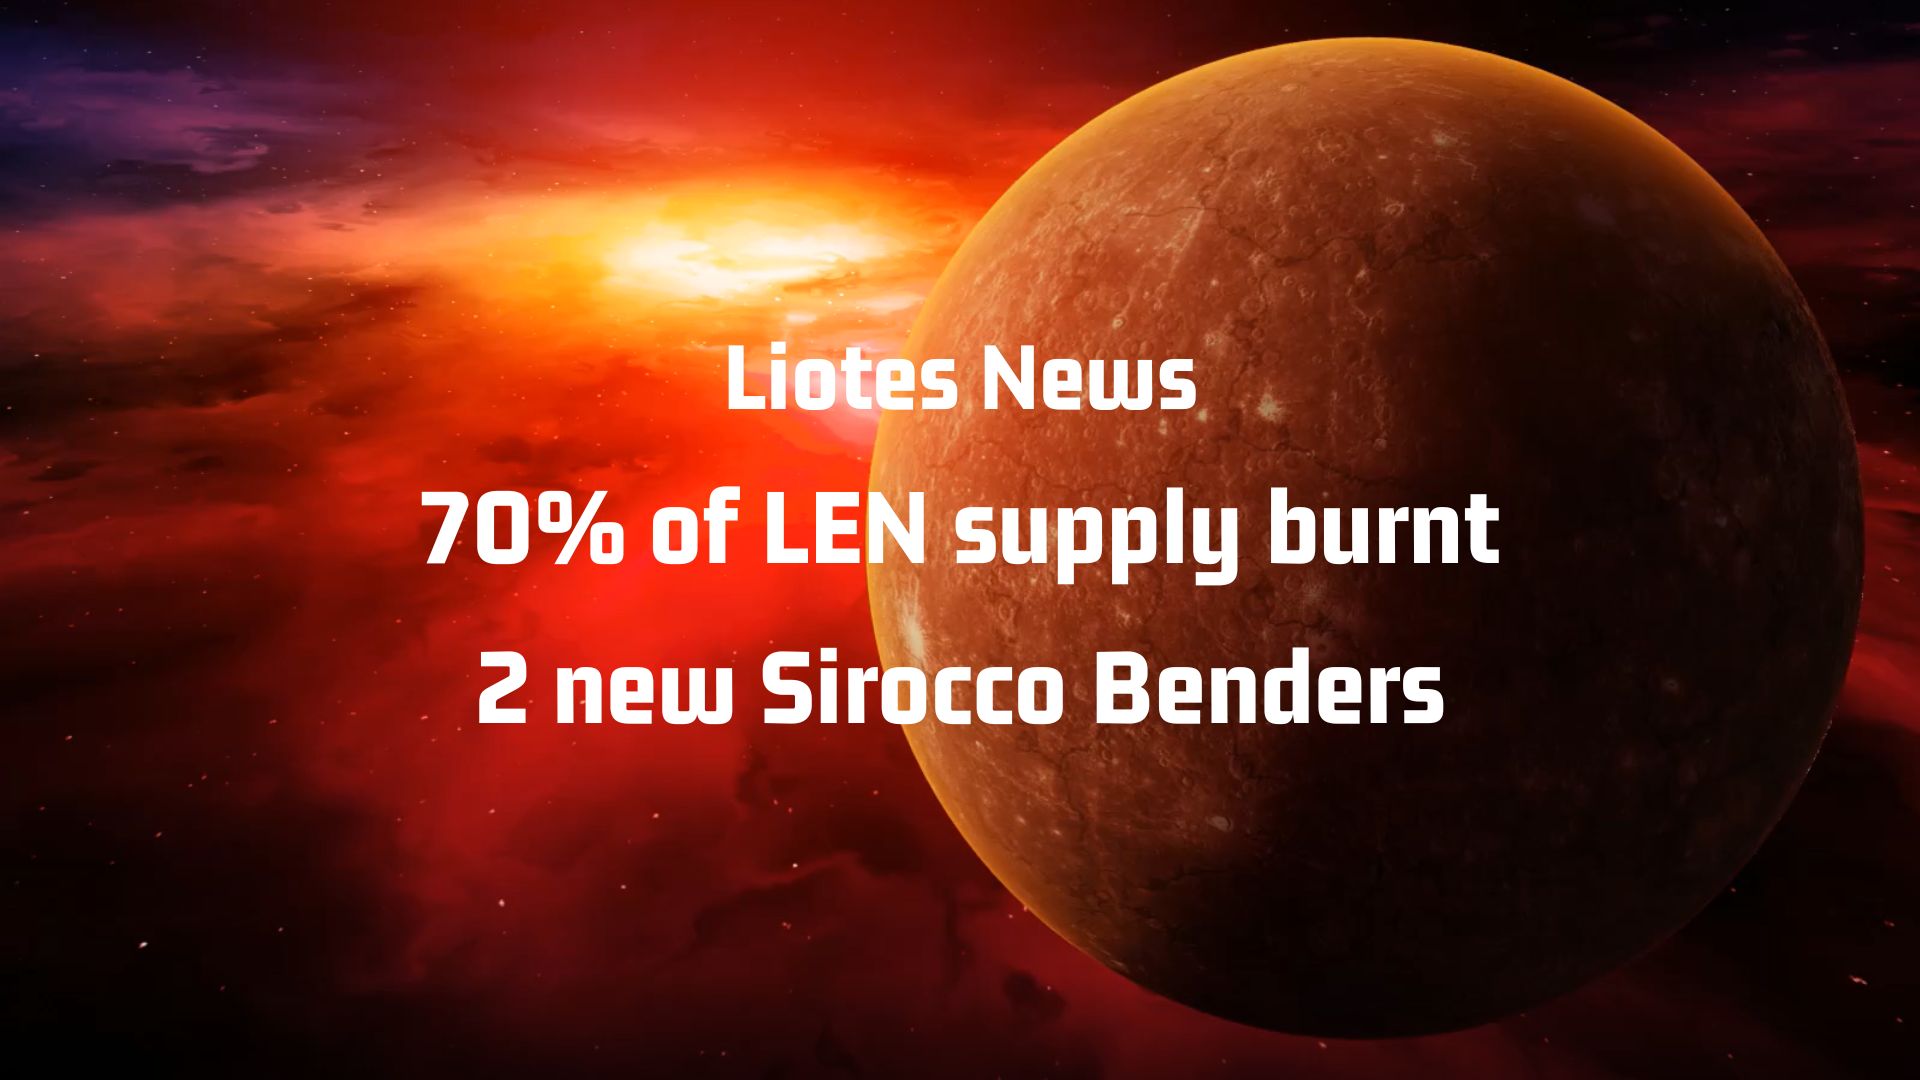 @liotes/70percent-of-token-supply-burnt-this-week-and-two-new-sirocco-benders